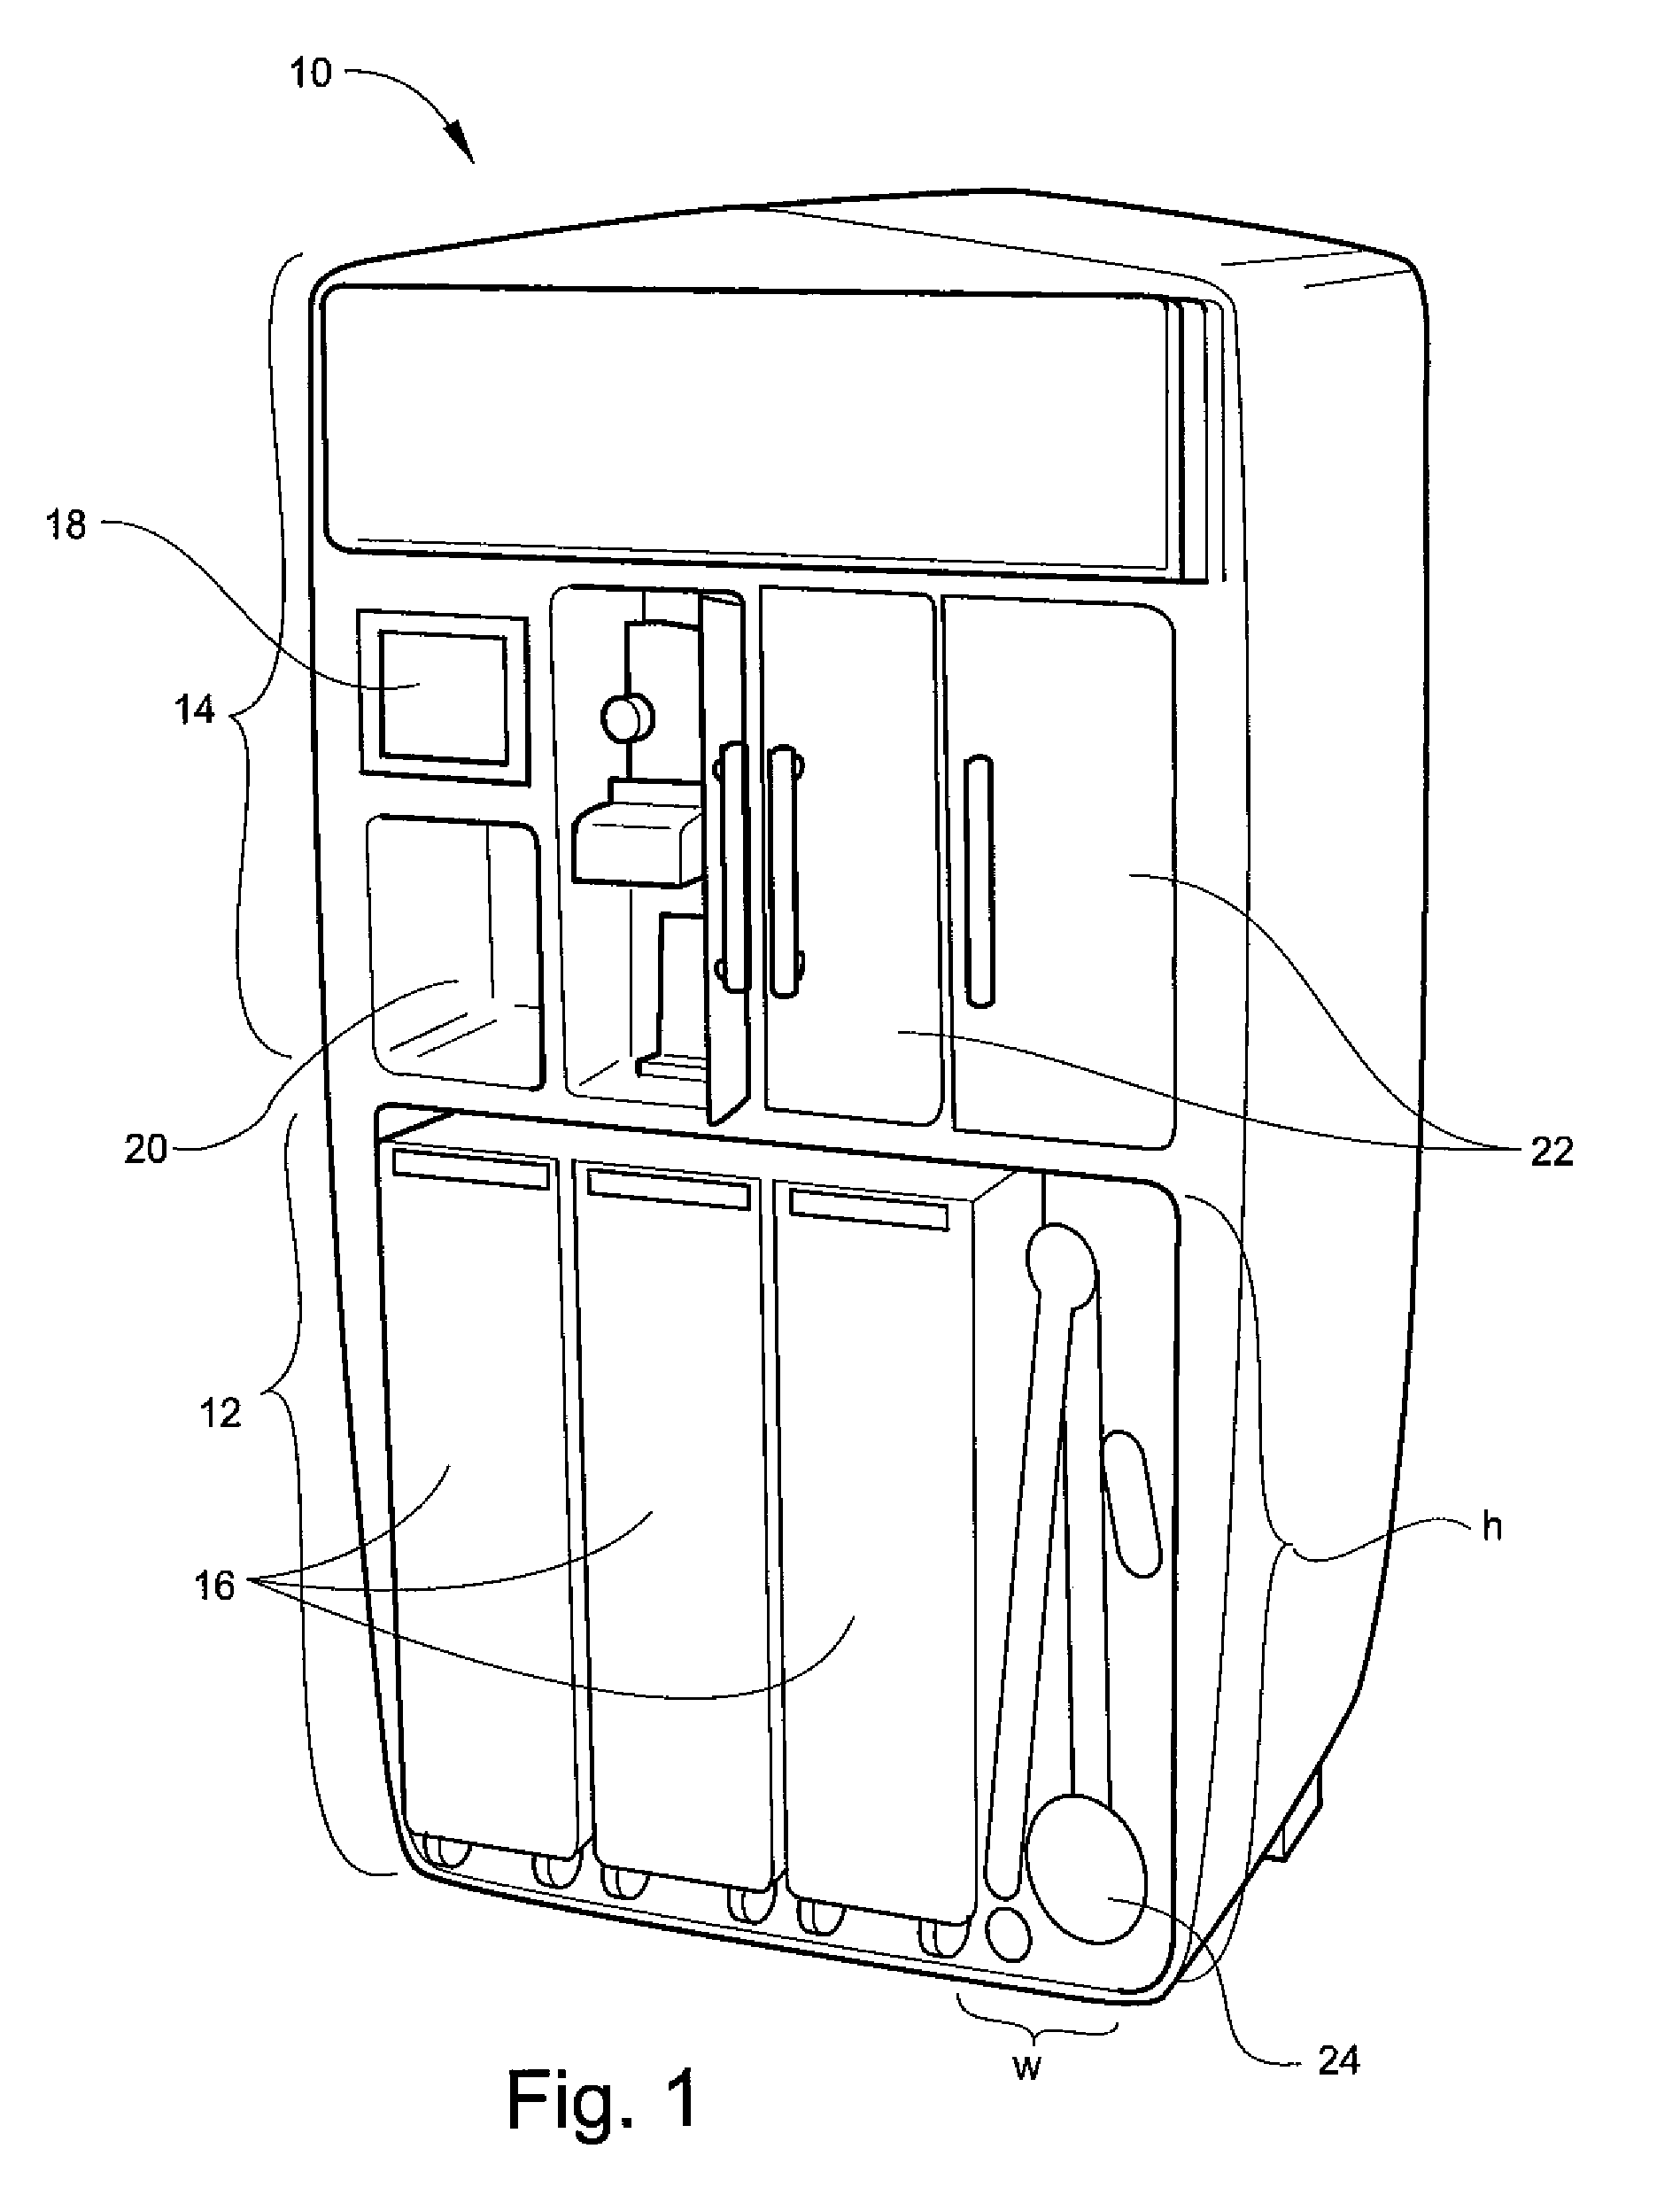 Folding cart for galley